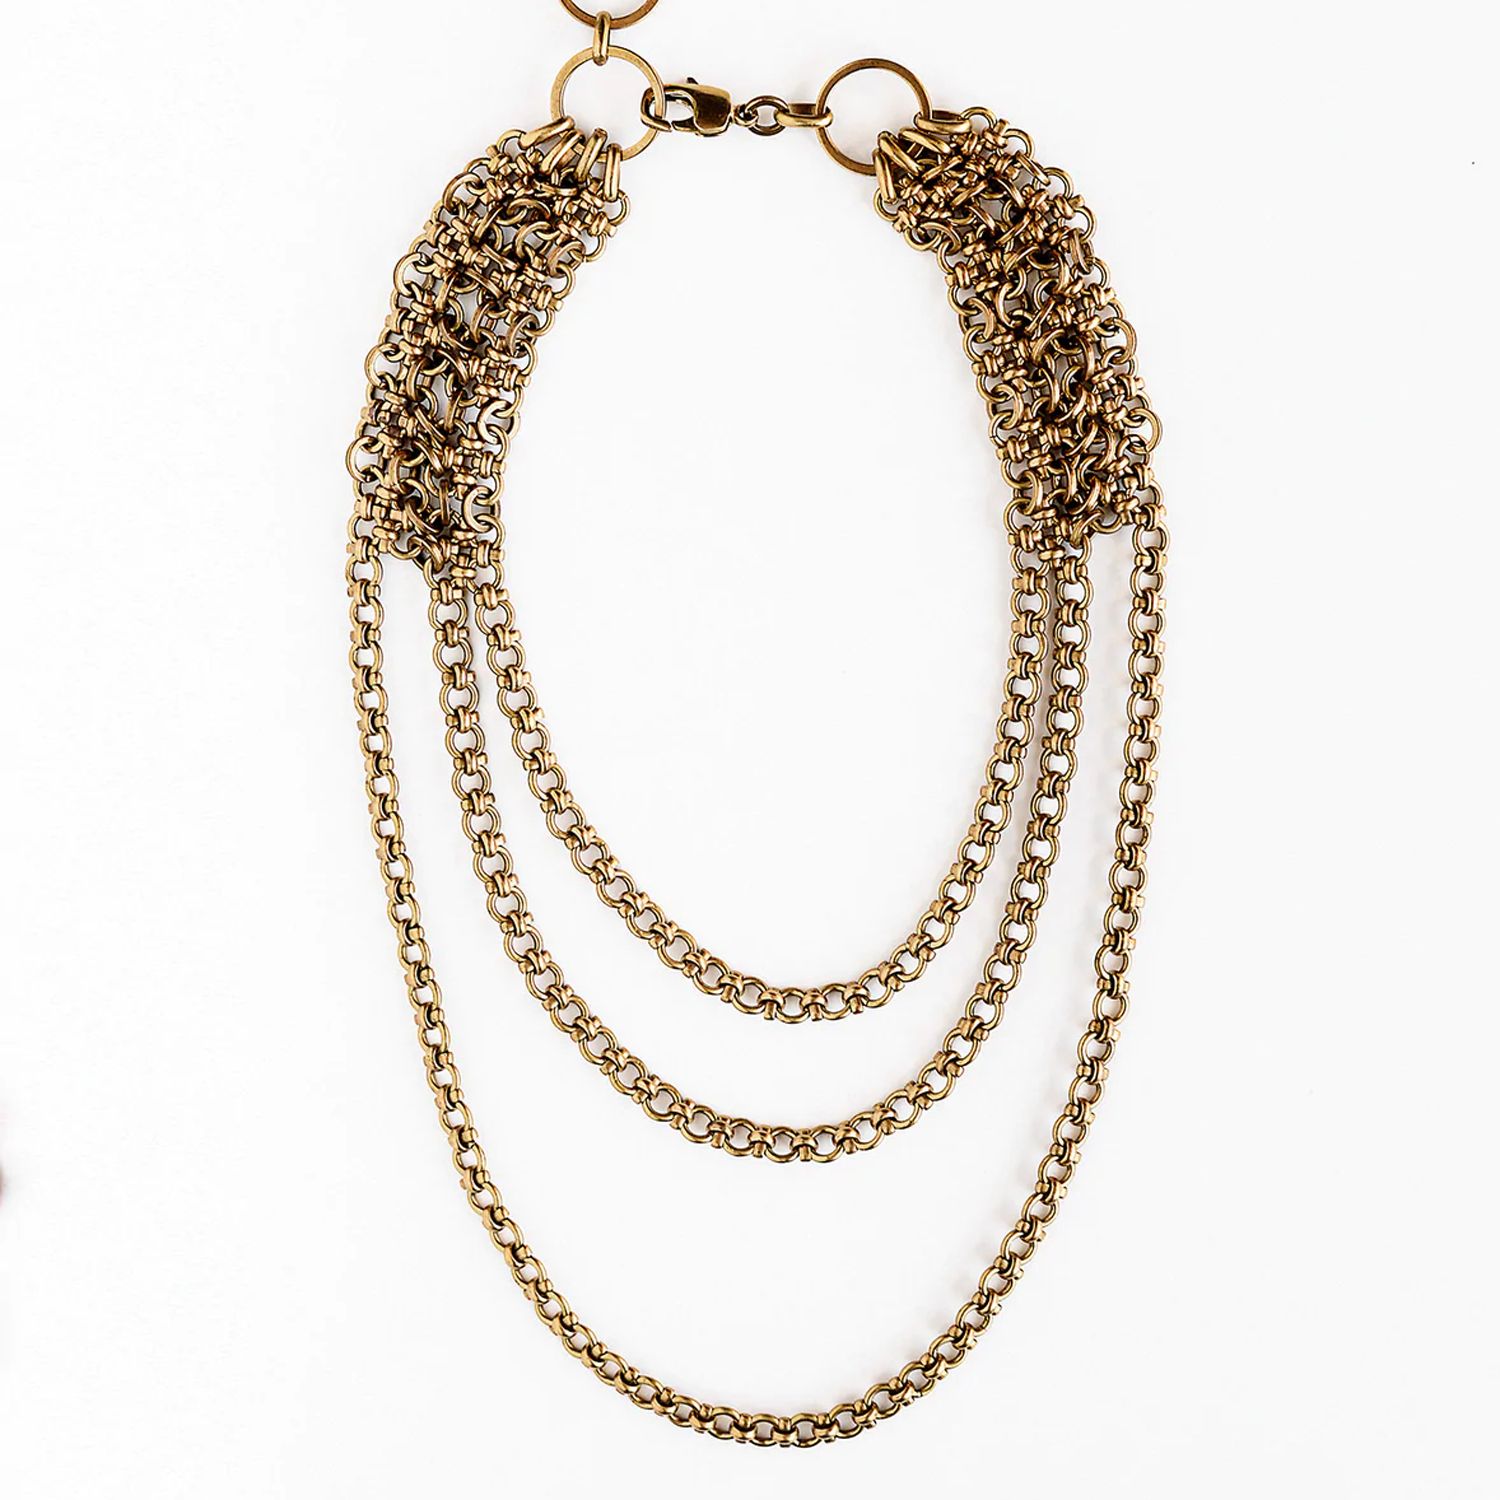 Michelle Ross: Orlee Necklace Product Image 1 of 3